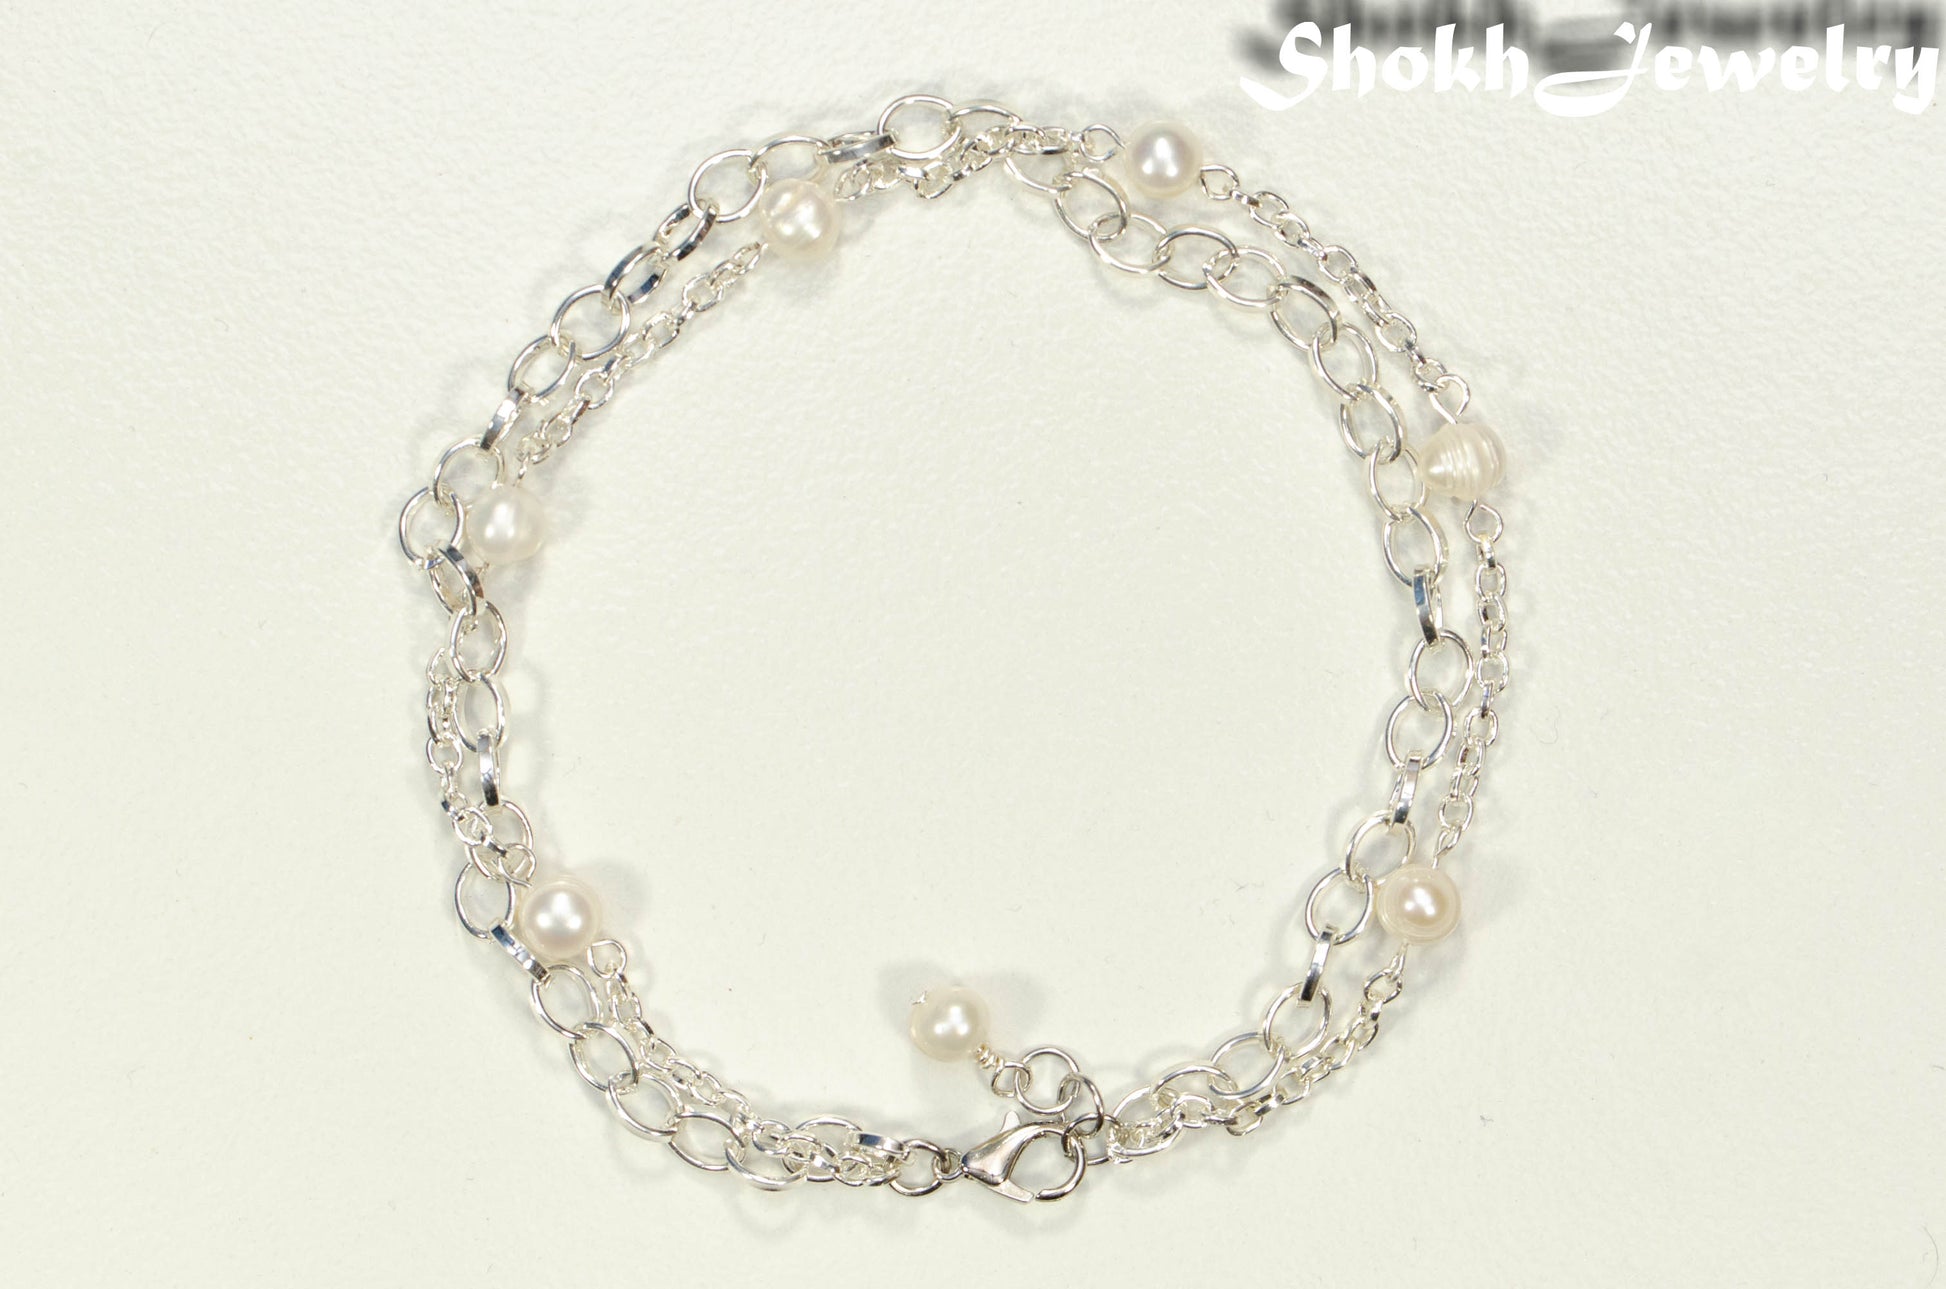 Top view of Double Layered Chain and Freshwater Pearl Anklet.